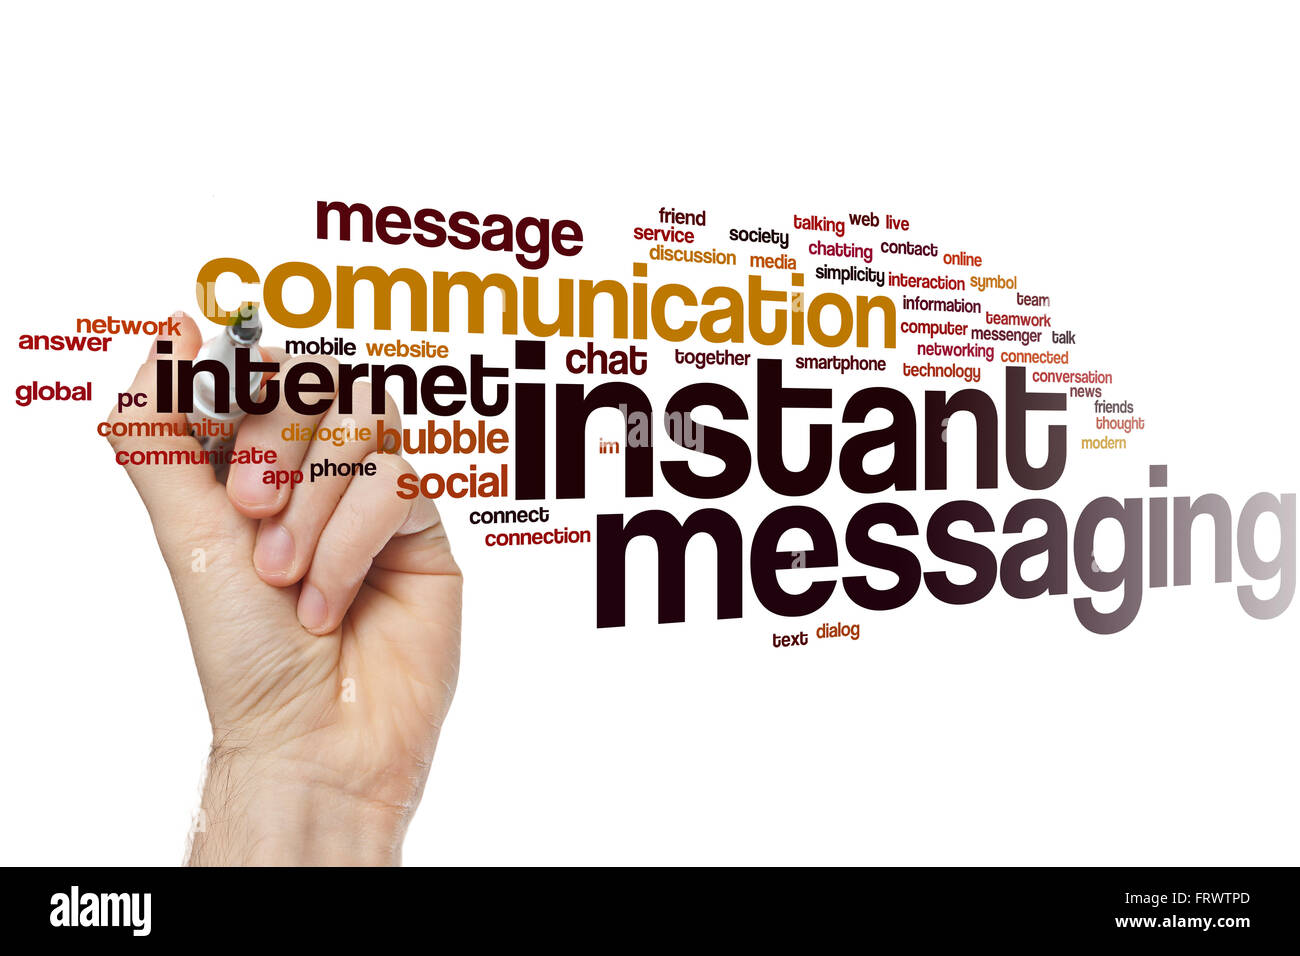 Instant messaging concept word cloud background Stock Photo